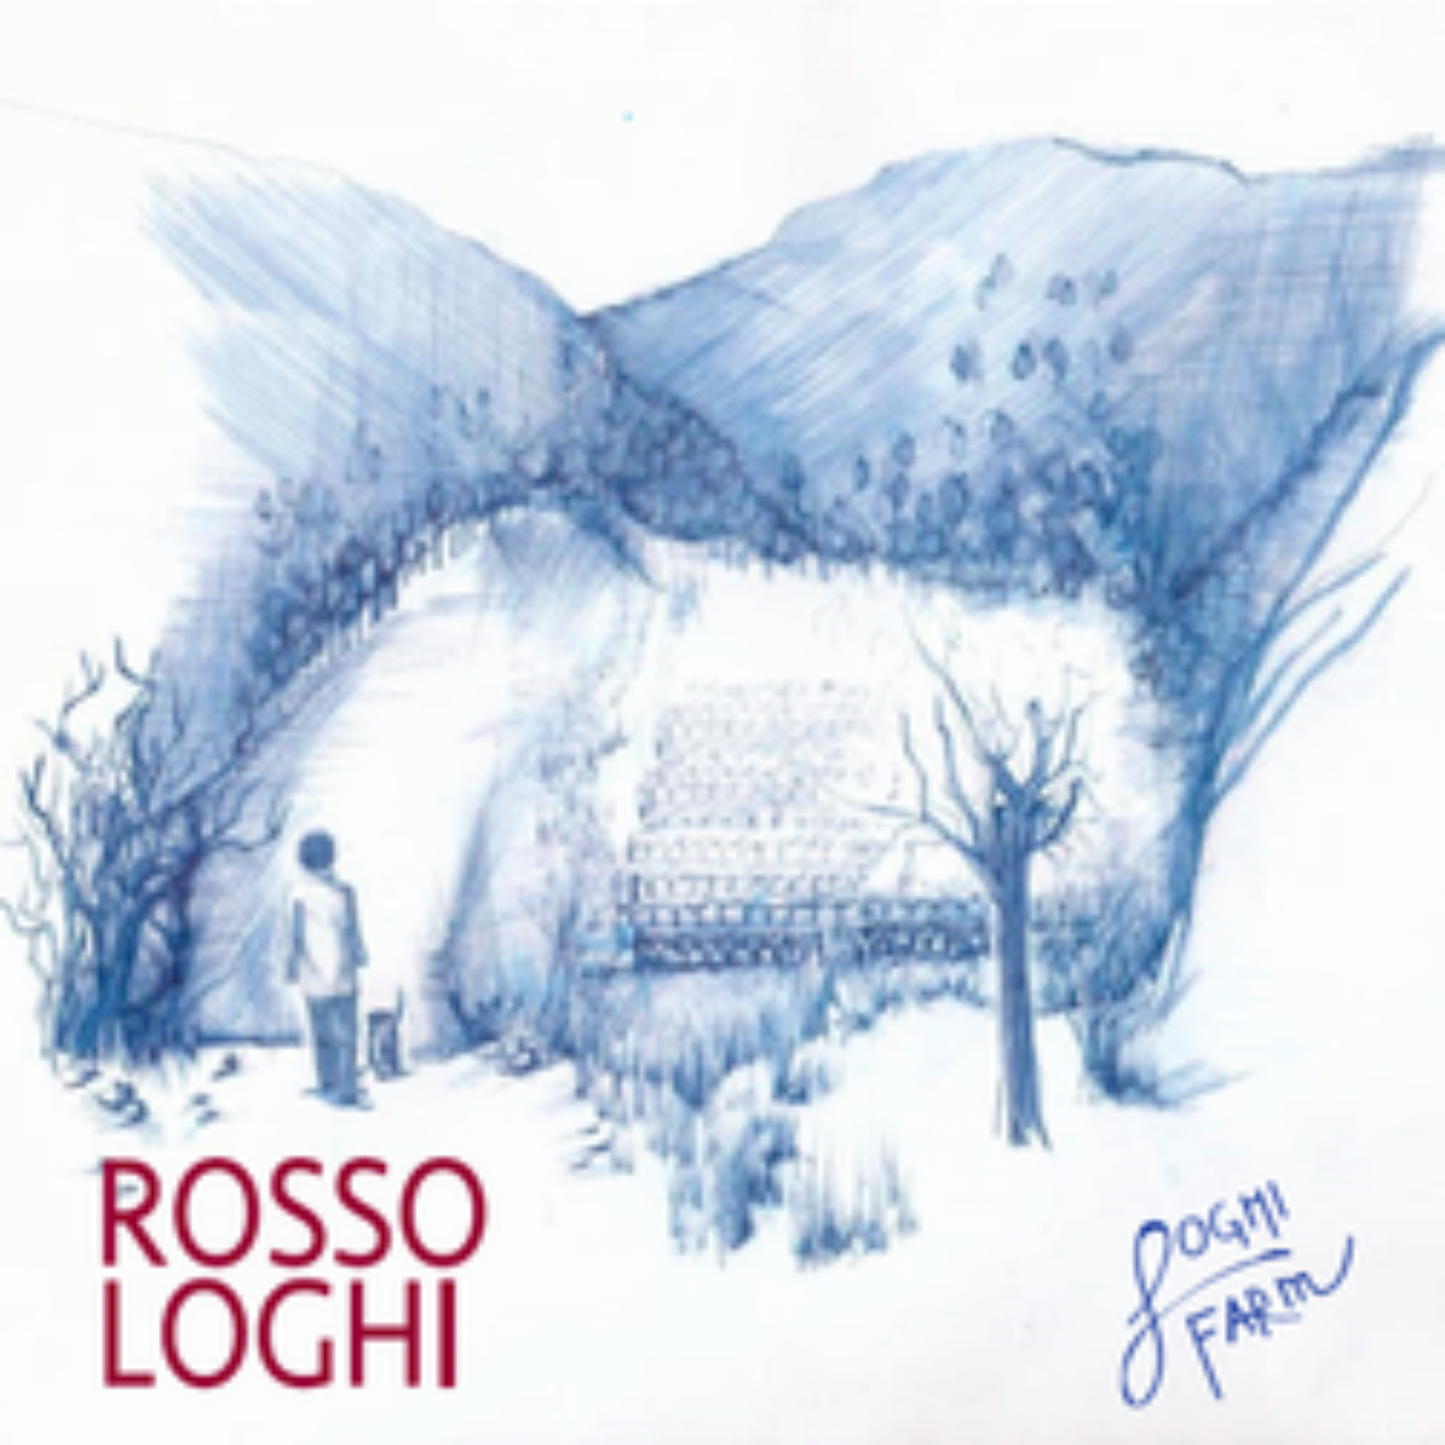 Loghi Rosso 2019 (750 ml)